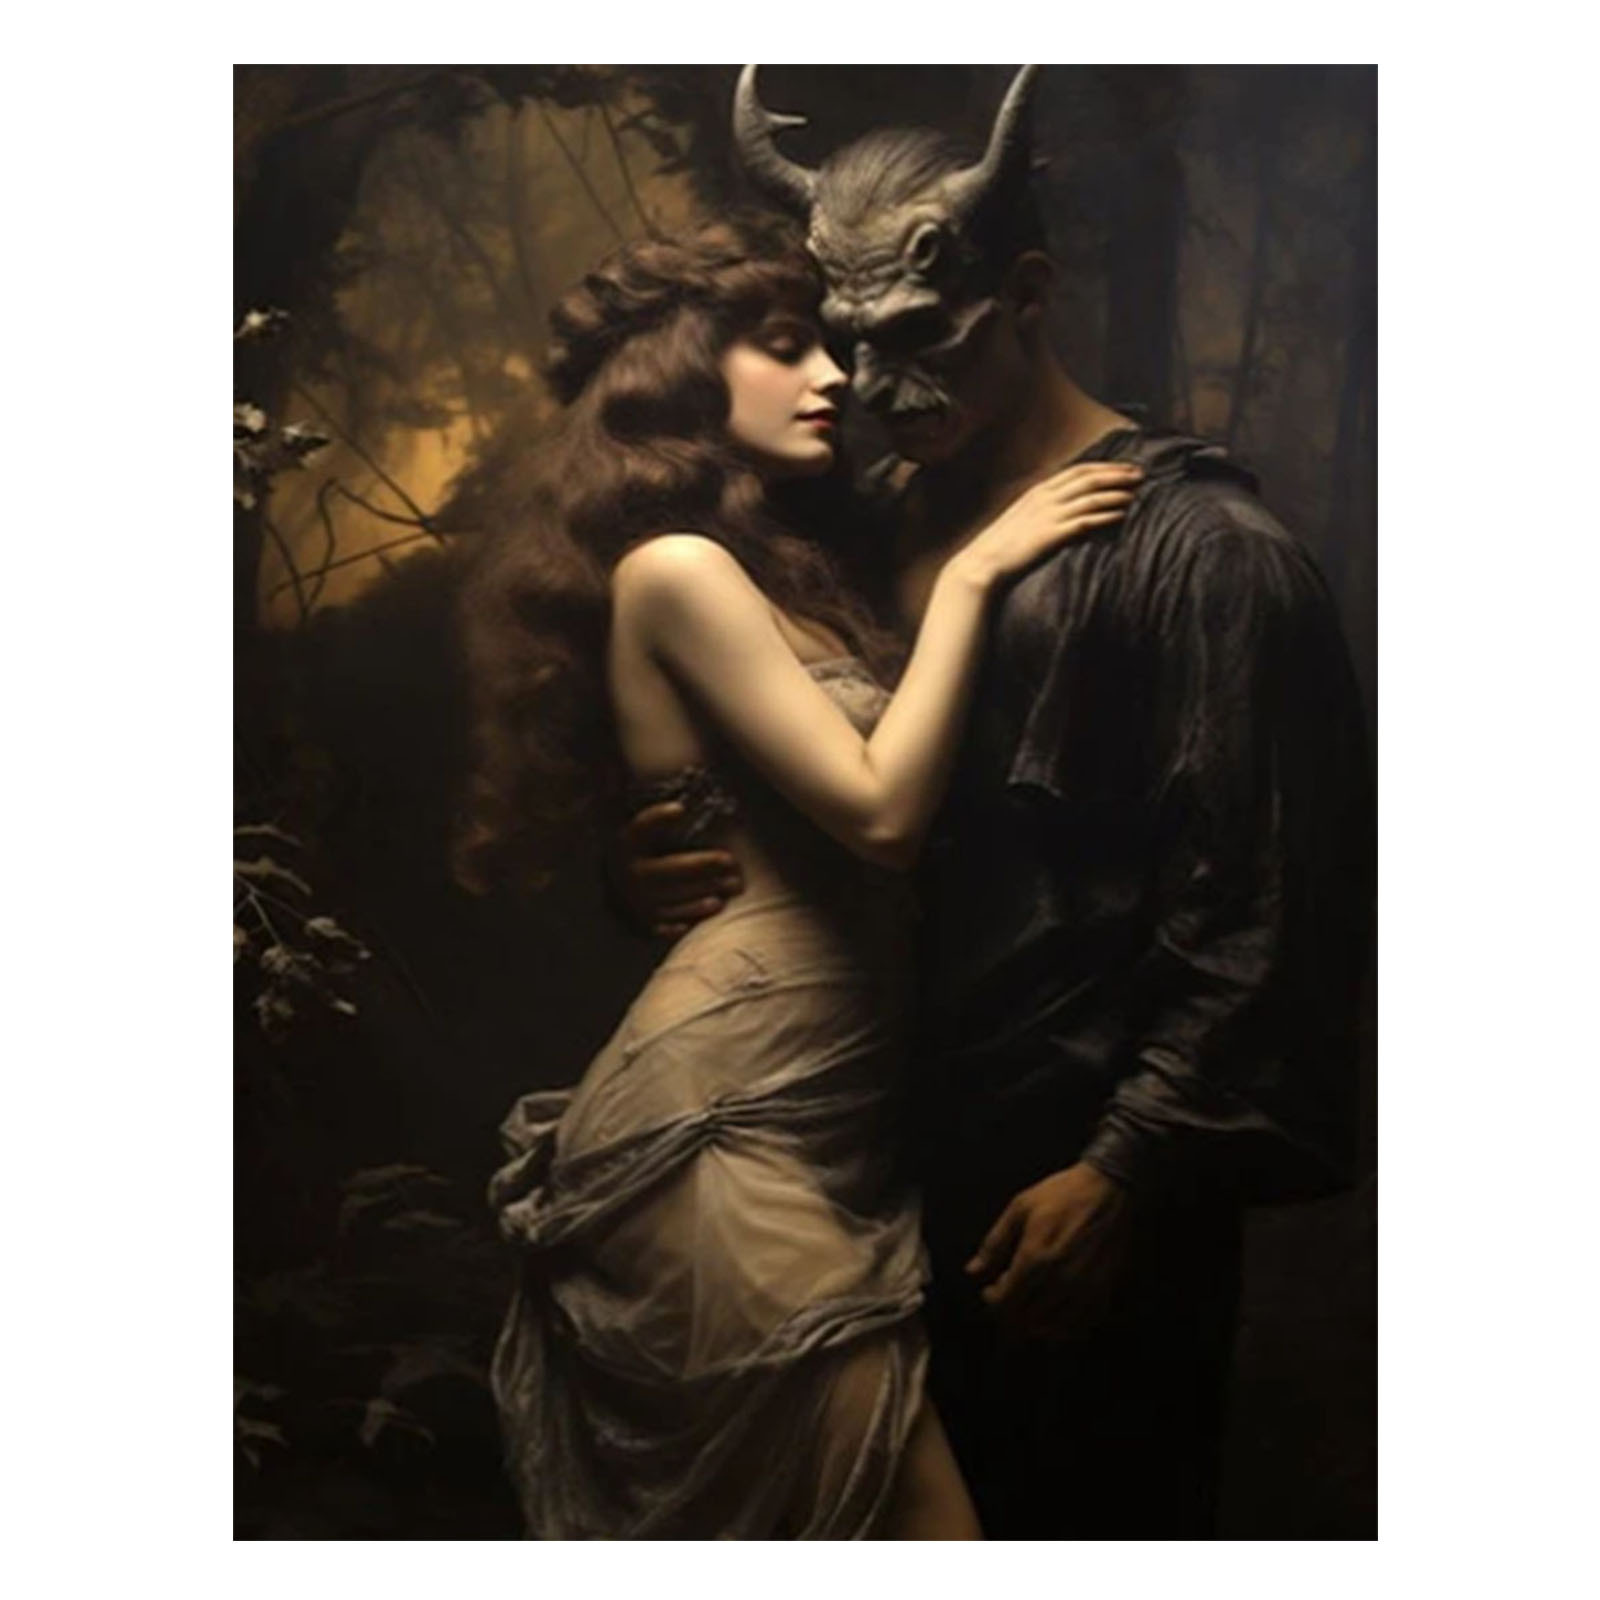 

Gothic Love Story Canvas Art Print - Unframed 18x12" Dark Romance Fantasy Poster, Perfect For Bedroom, Living Room, Or Office Decor